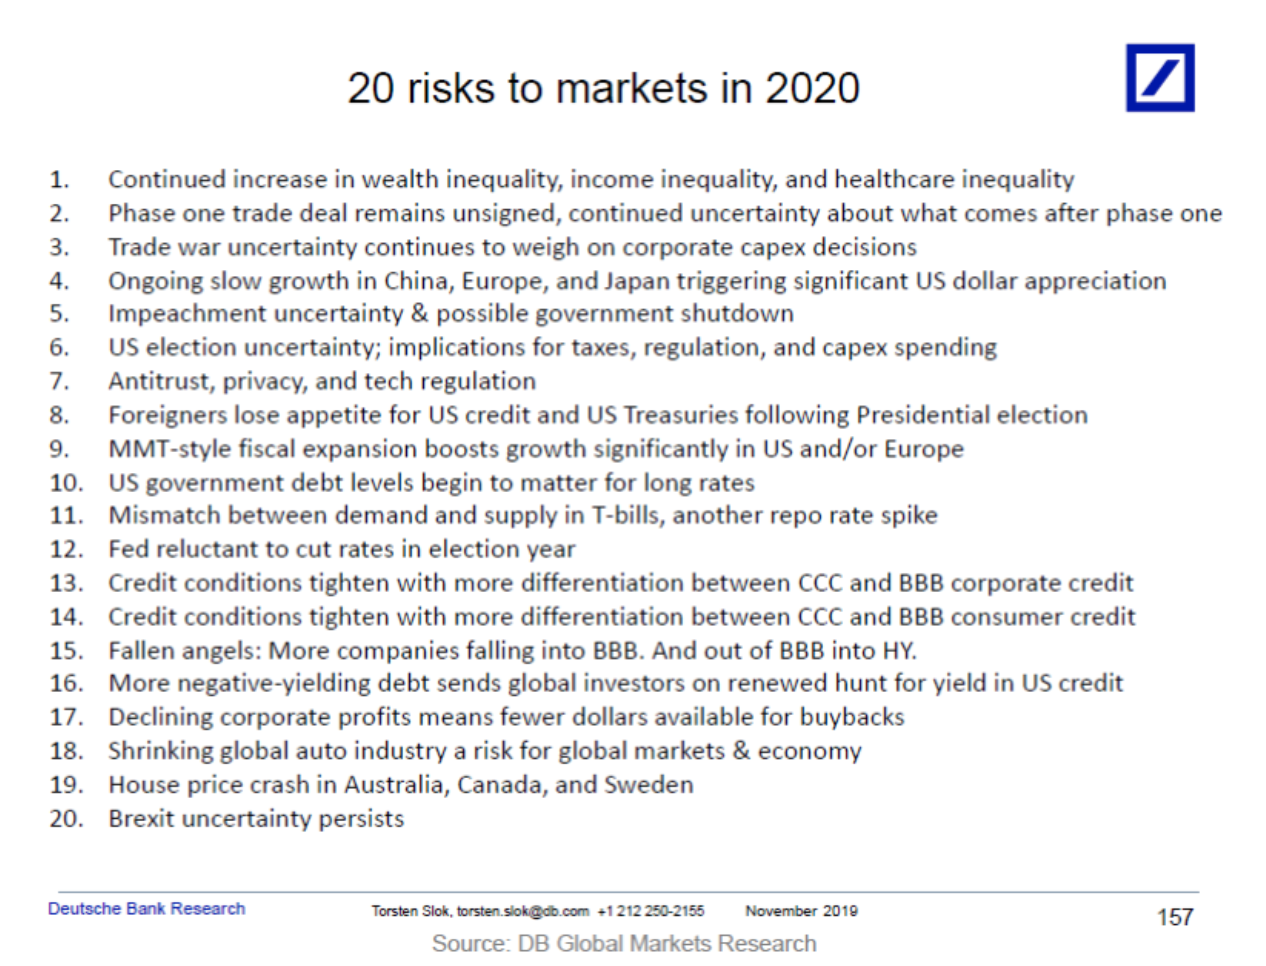 20 risks to the markets 